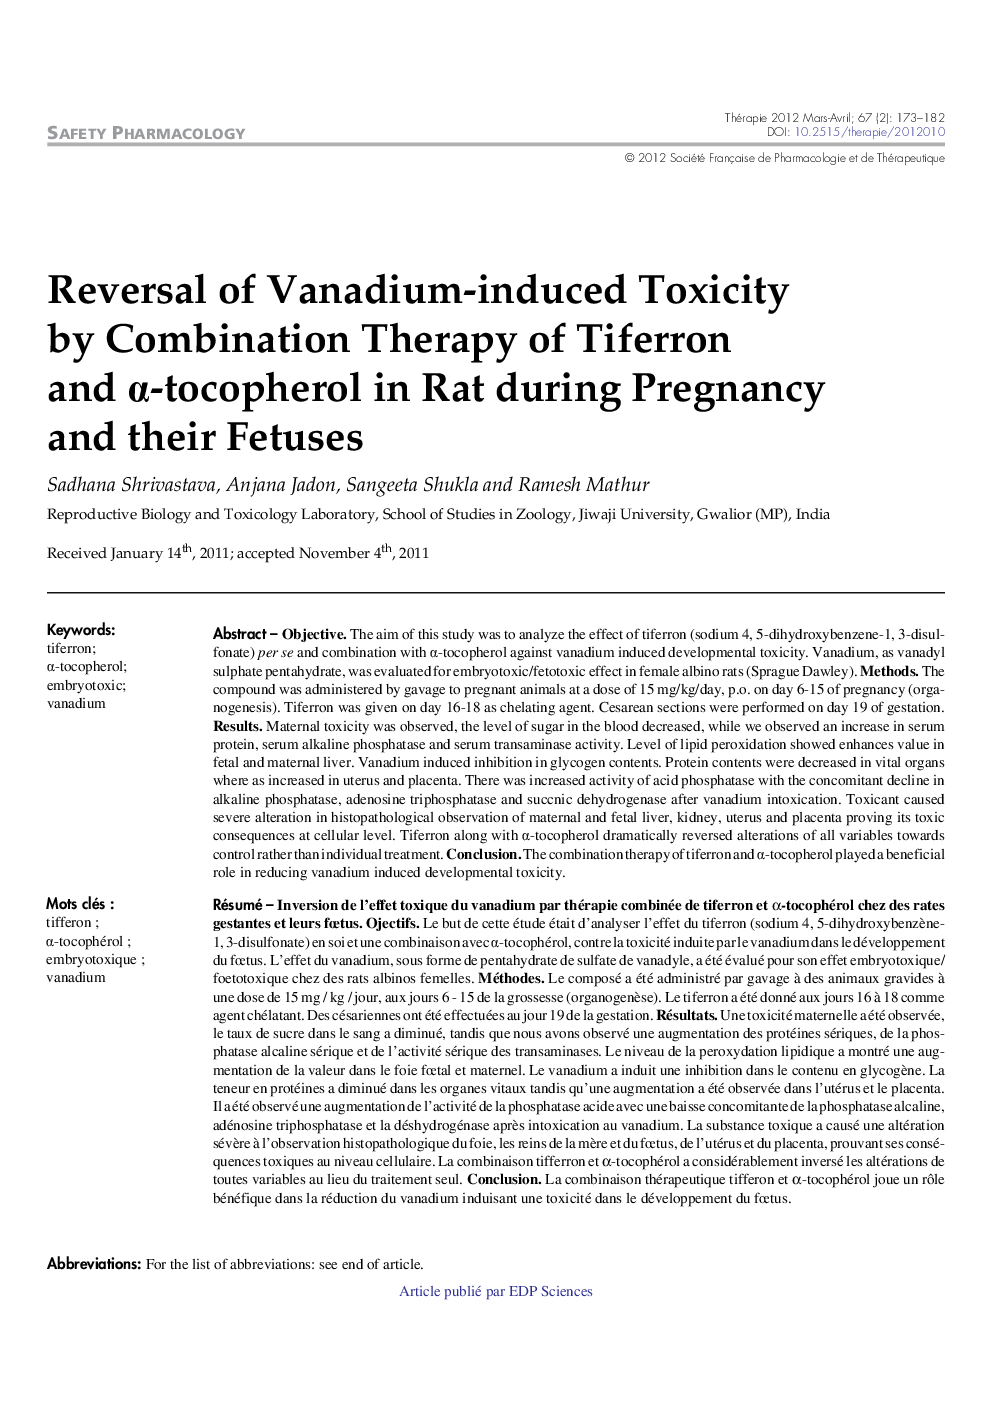 Reversal of Vanadium-induced Toxicity by Combination Therapy of Tiferron and Î±-tocopherol in Rat during Pregnancy and their Fetuses